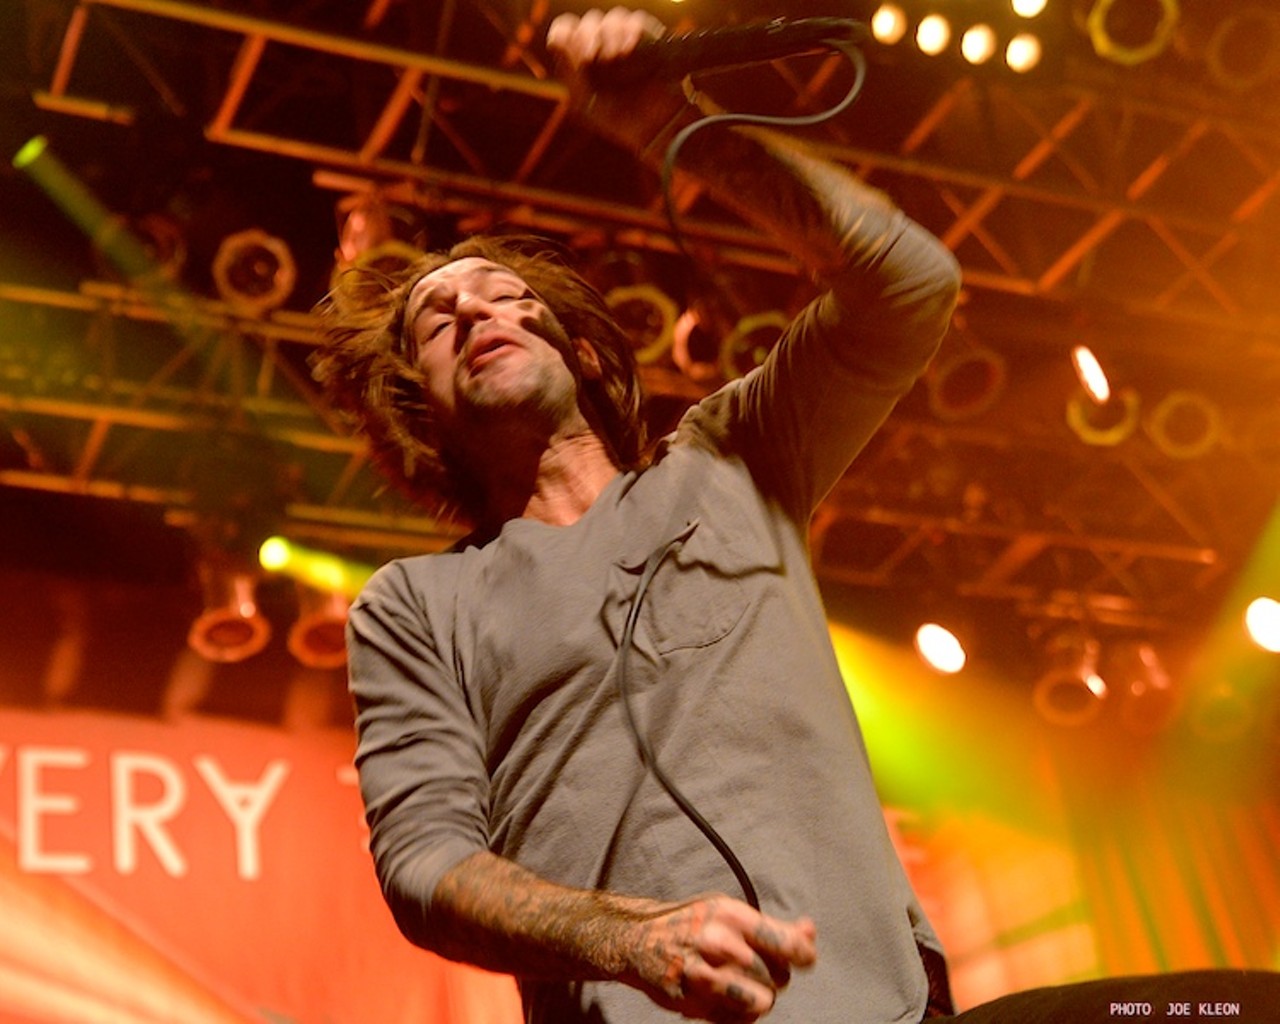 Every Time I Die and the Ghost Inside Performing at House of Blues